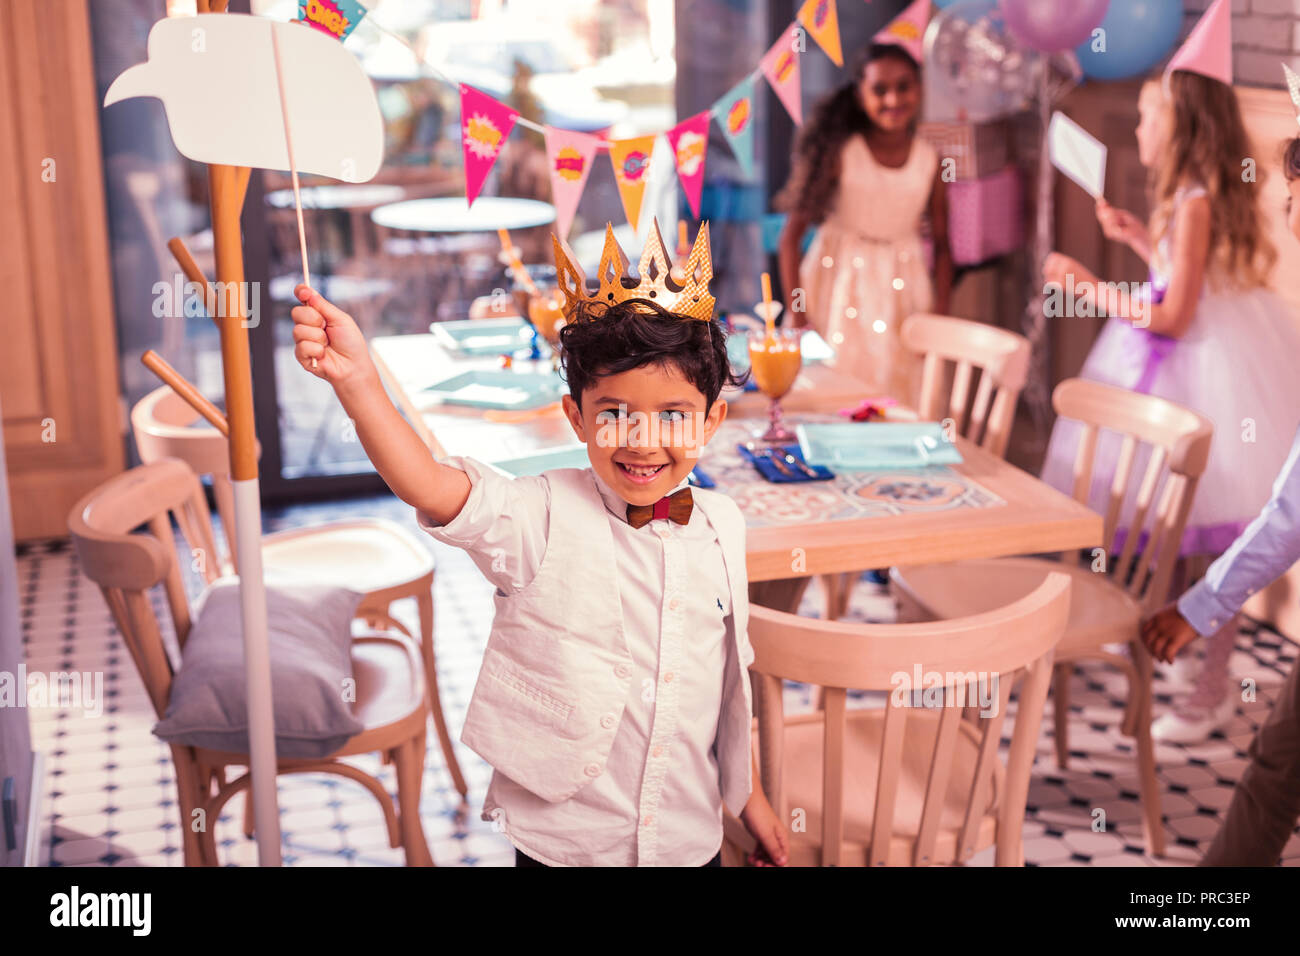 Little boy wearing paper crown and putting hand up at the party Stock Photo